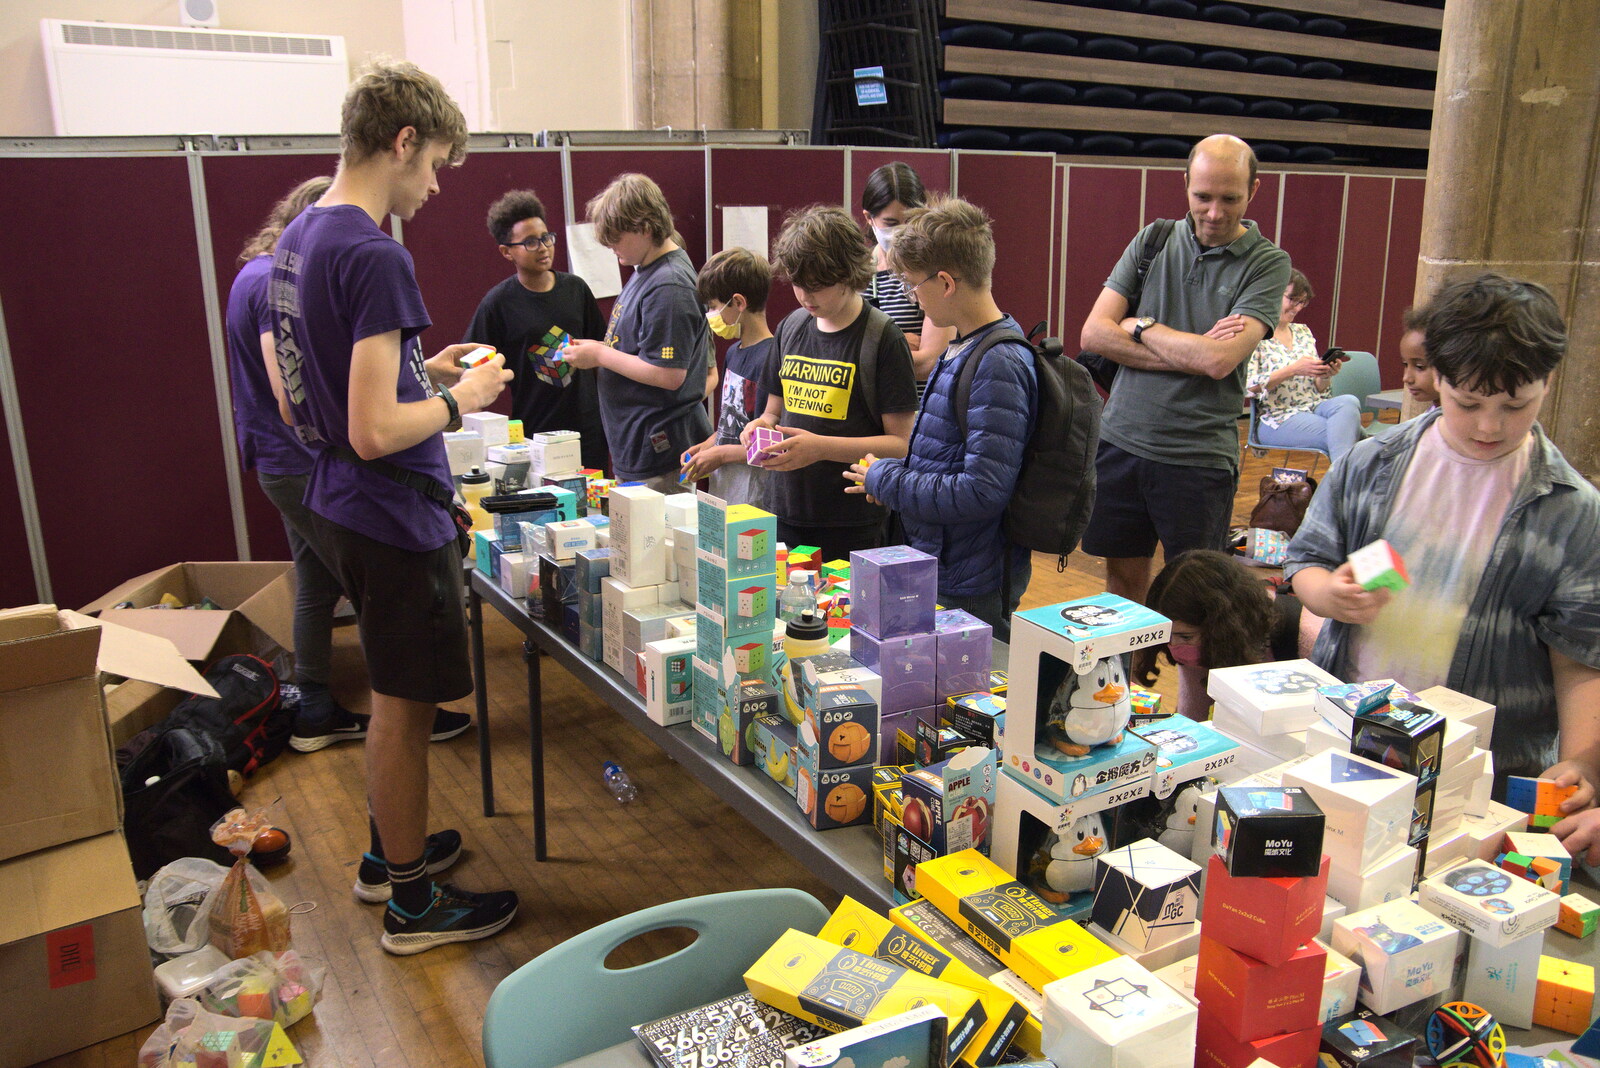 The World Cube Association Rubik's Competition, St. Andrew's Hall, Norwich - 31st July 2022: The boys test out some cube merchandise